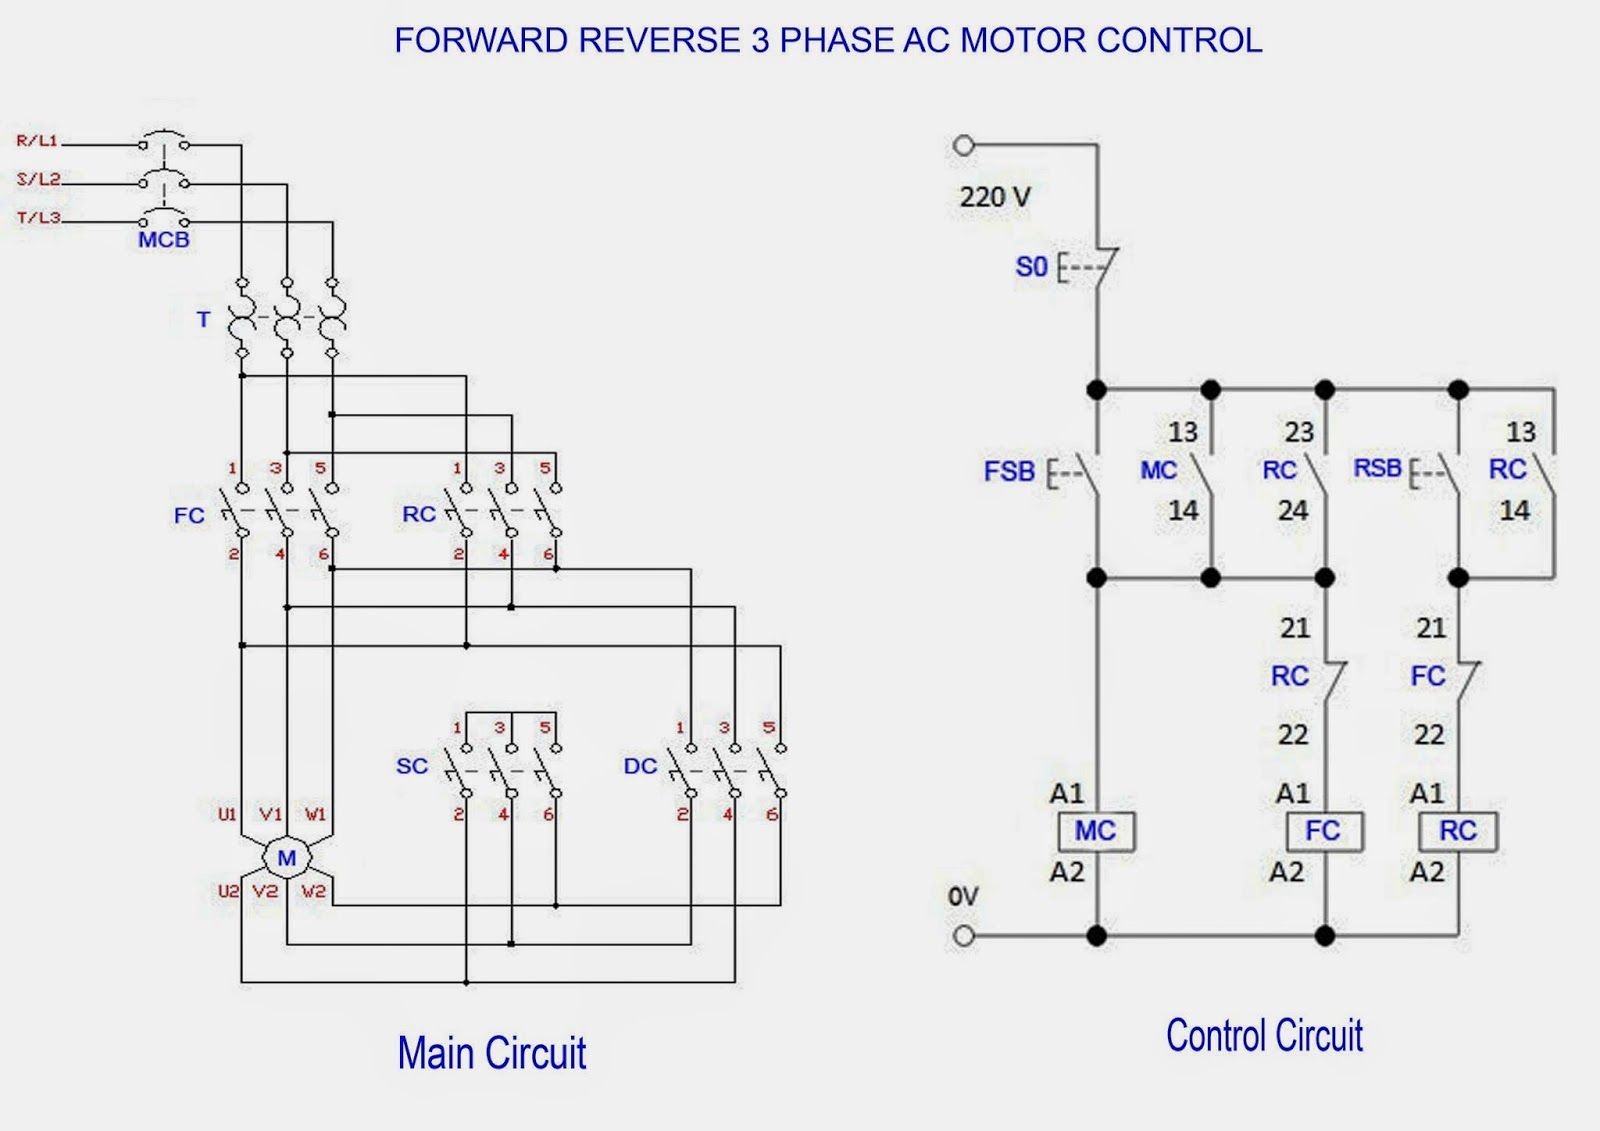 Forward Reverse Lader and Wiring Diagram forward & Reverse 3 Phase Ac Motor Control Circuit Diagram Of Forward Reverse Lader and Wiring Diagram